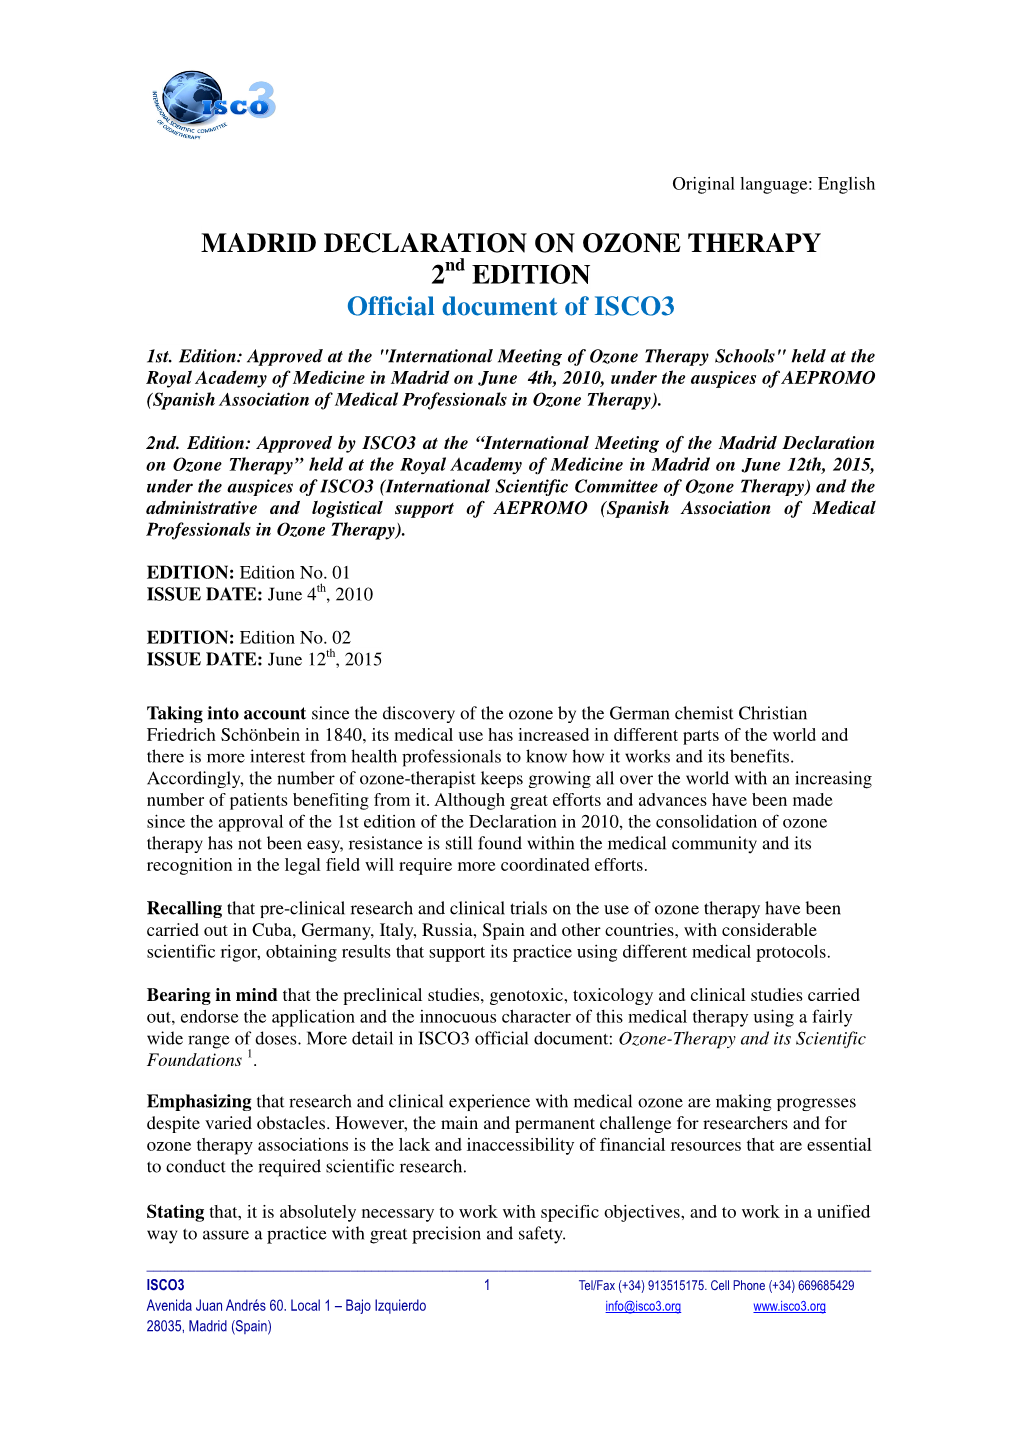 MADRID DECLARATION on OZONE THERAPY 2 EDITION Official